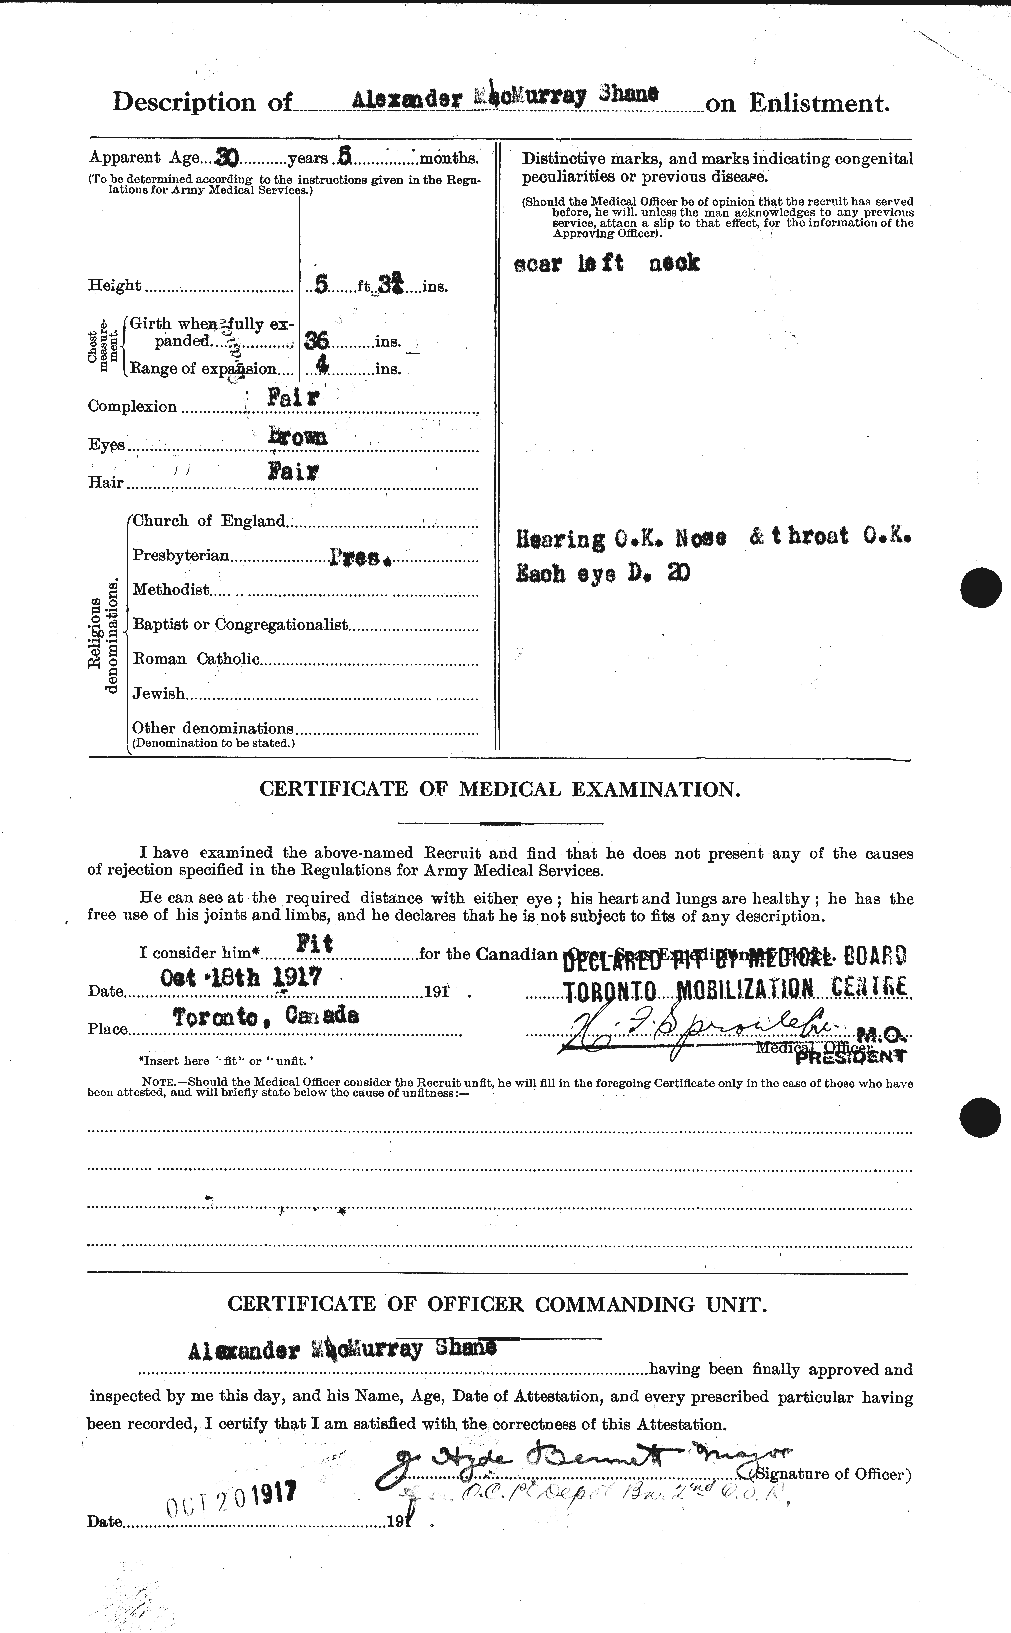 Personnel Records of the First World War - CEF 084136b